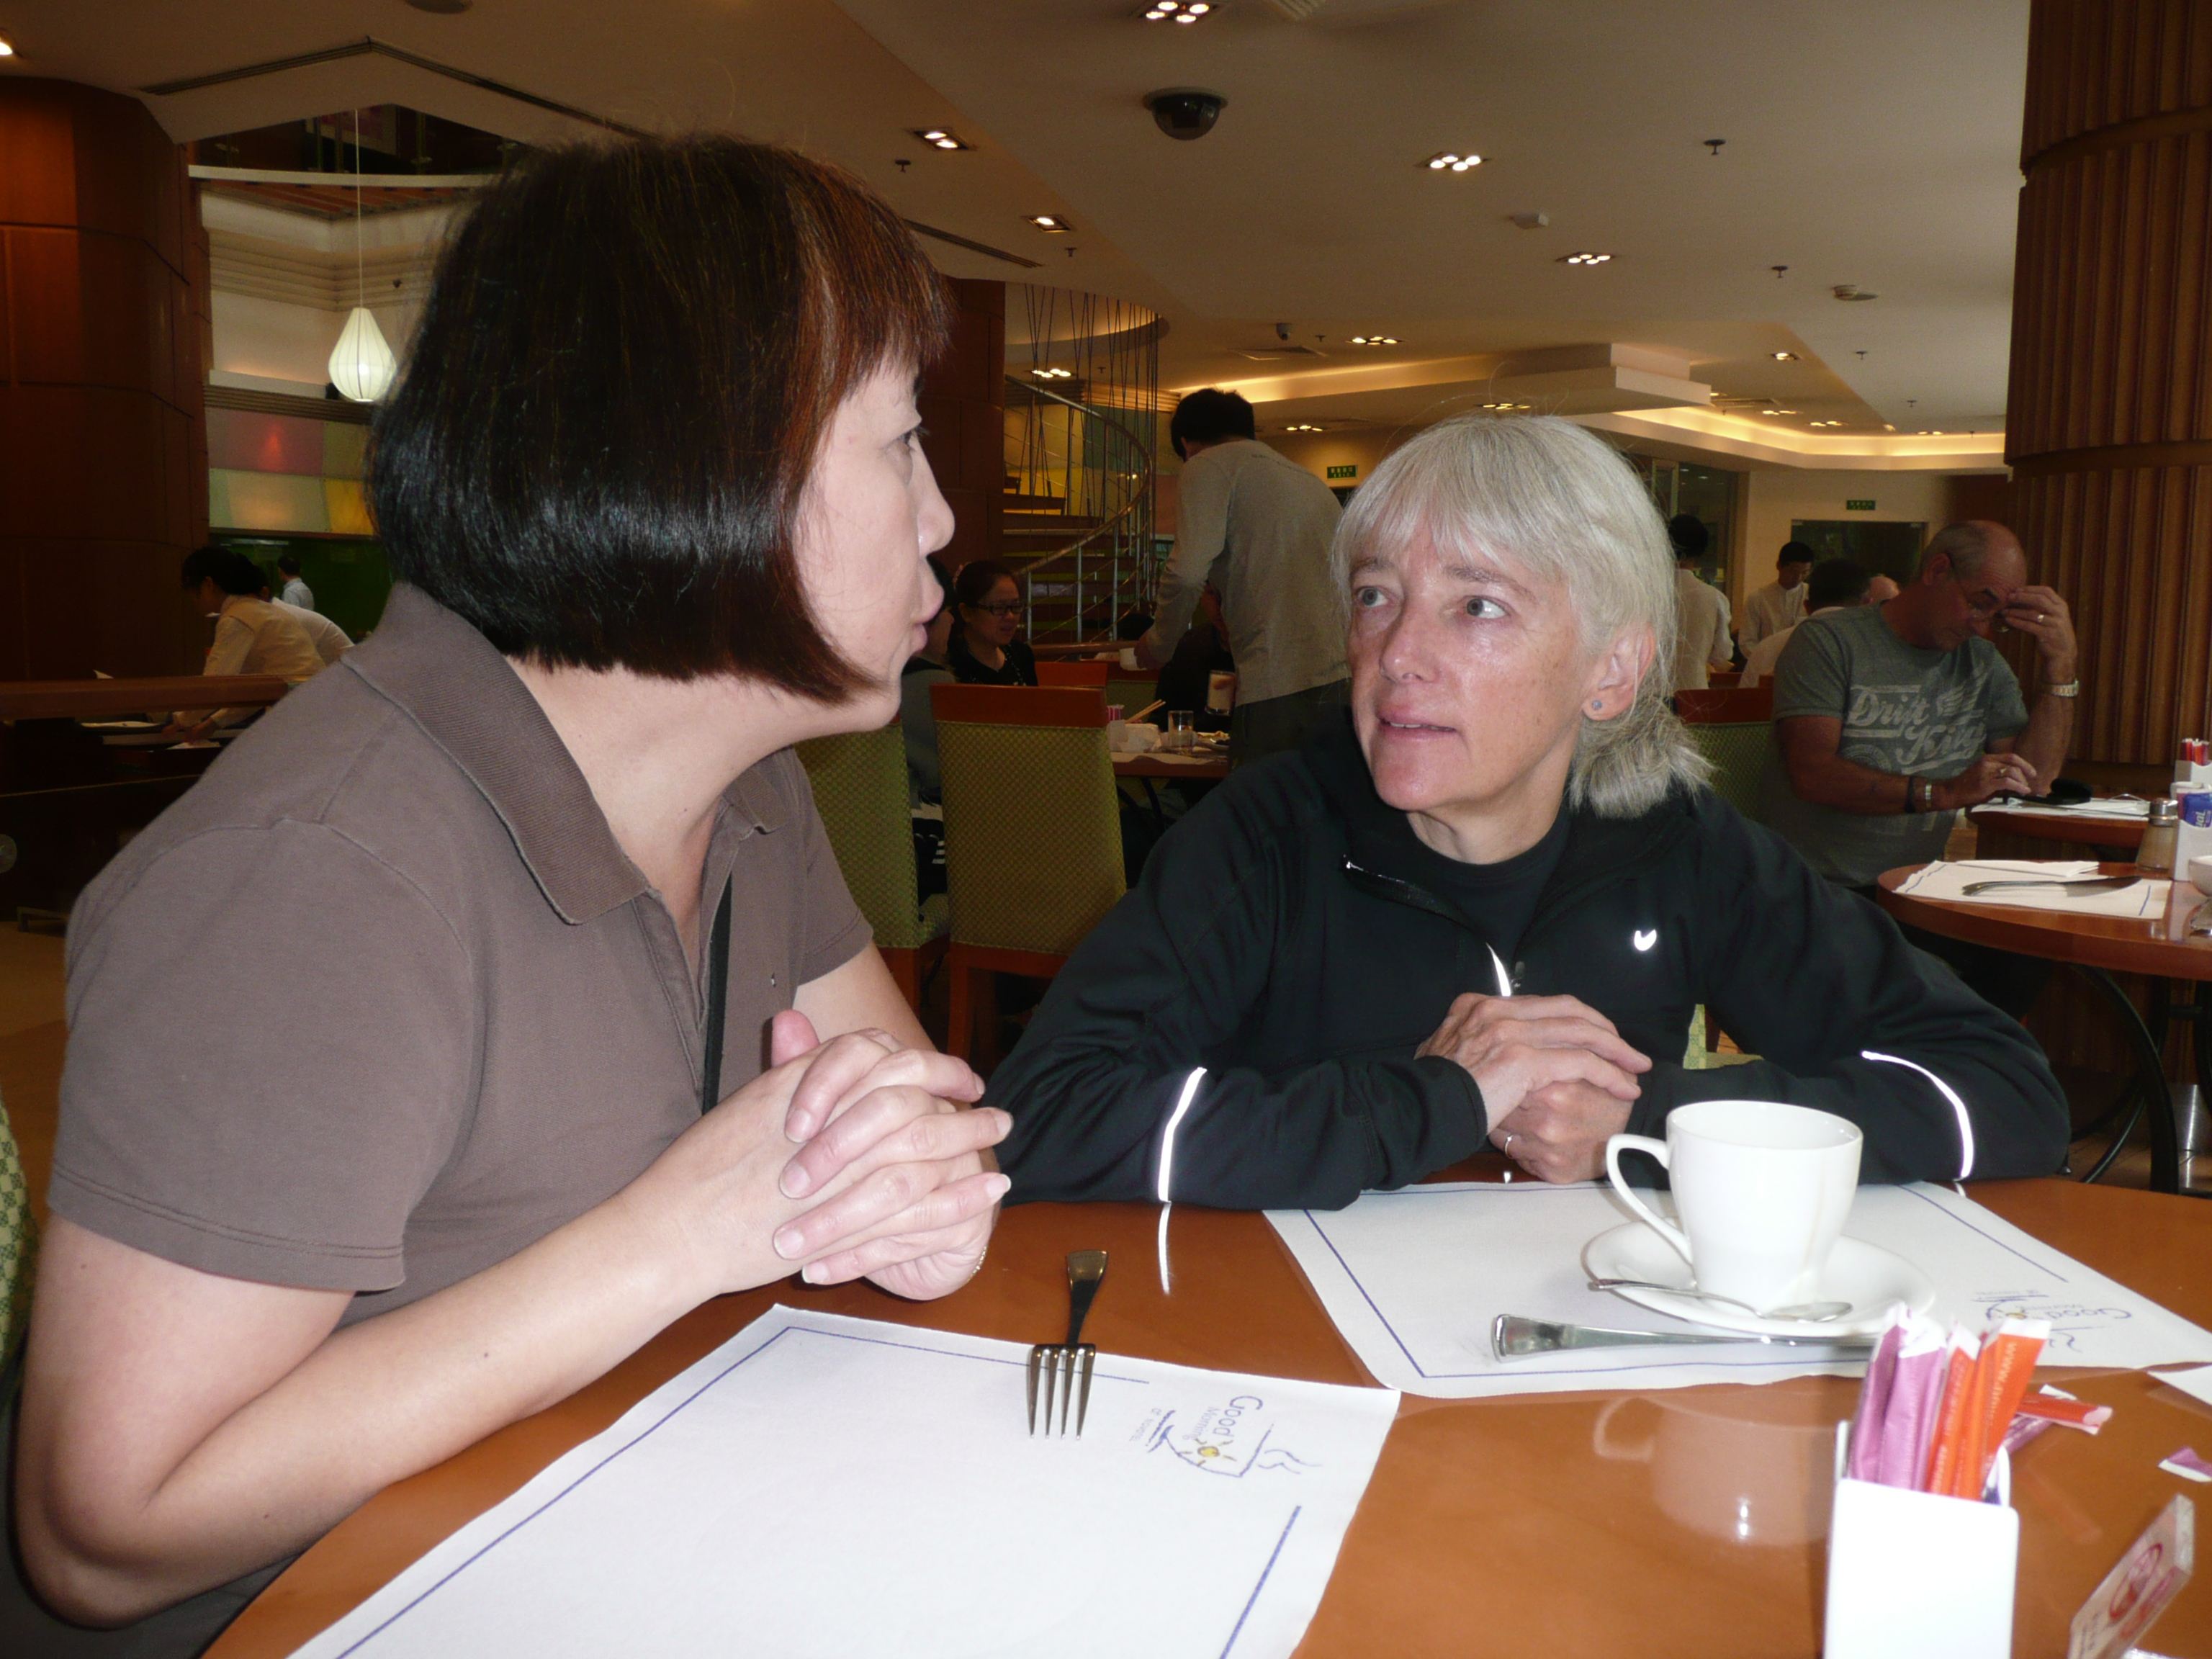 Yunhong Zhang (left) and Kimberley Nemrava (right) chat over a meal.